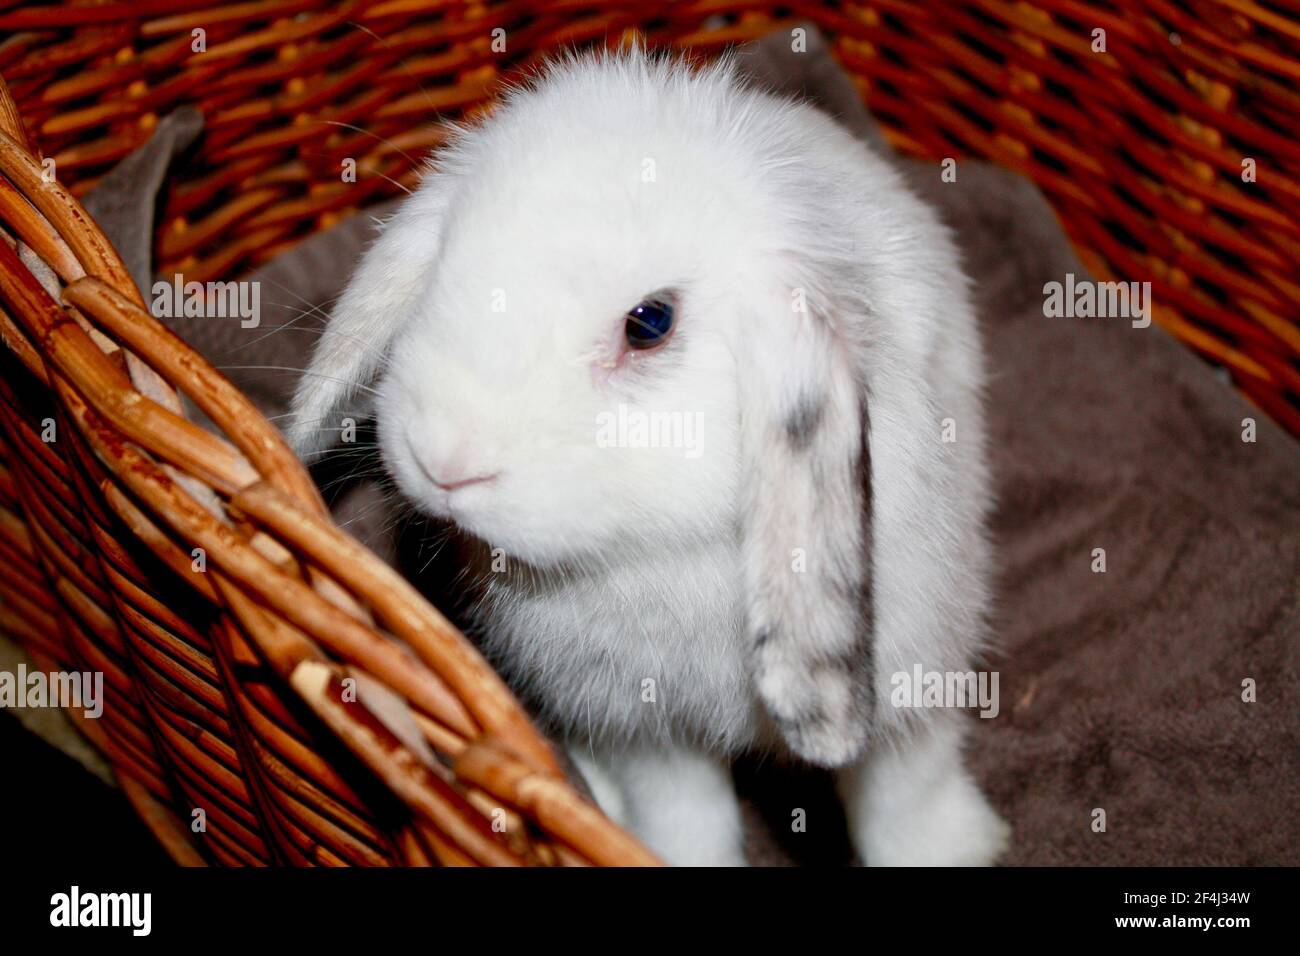 Baby Female Harlequin and White Holland Lop Bunny Rabbit Sitting in Wicker Basket Oryctolagus cuniculus Stock Photo